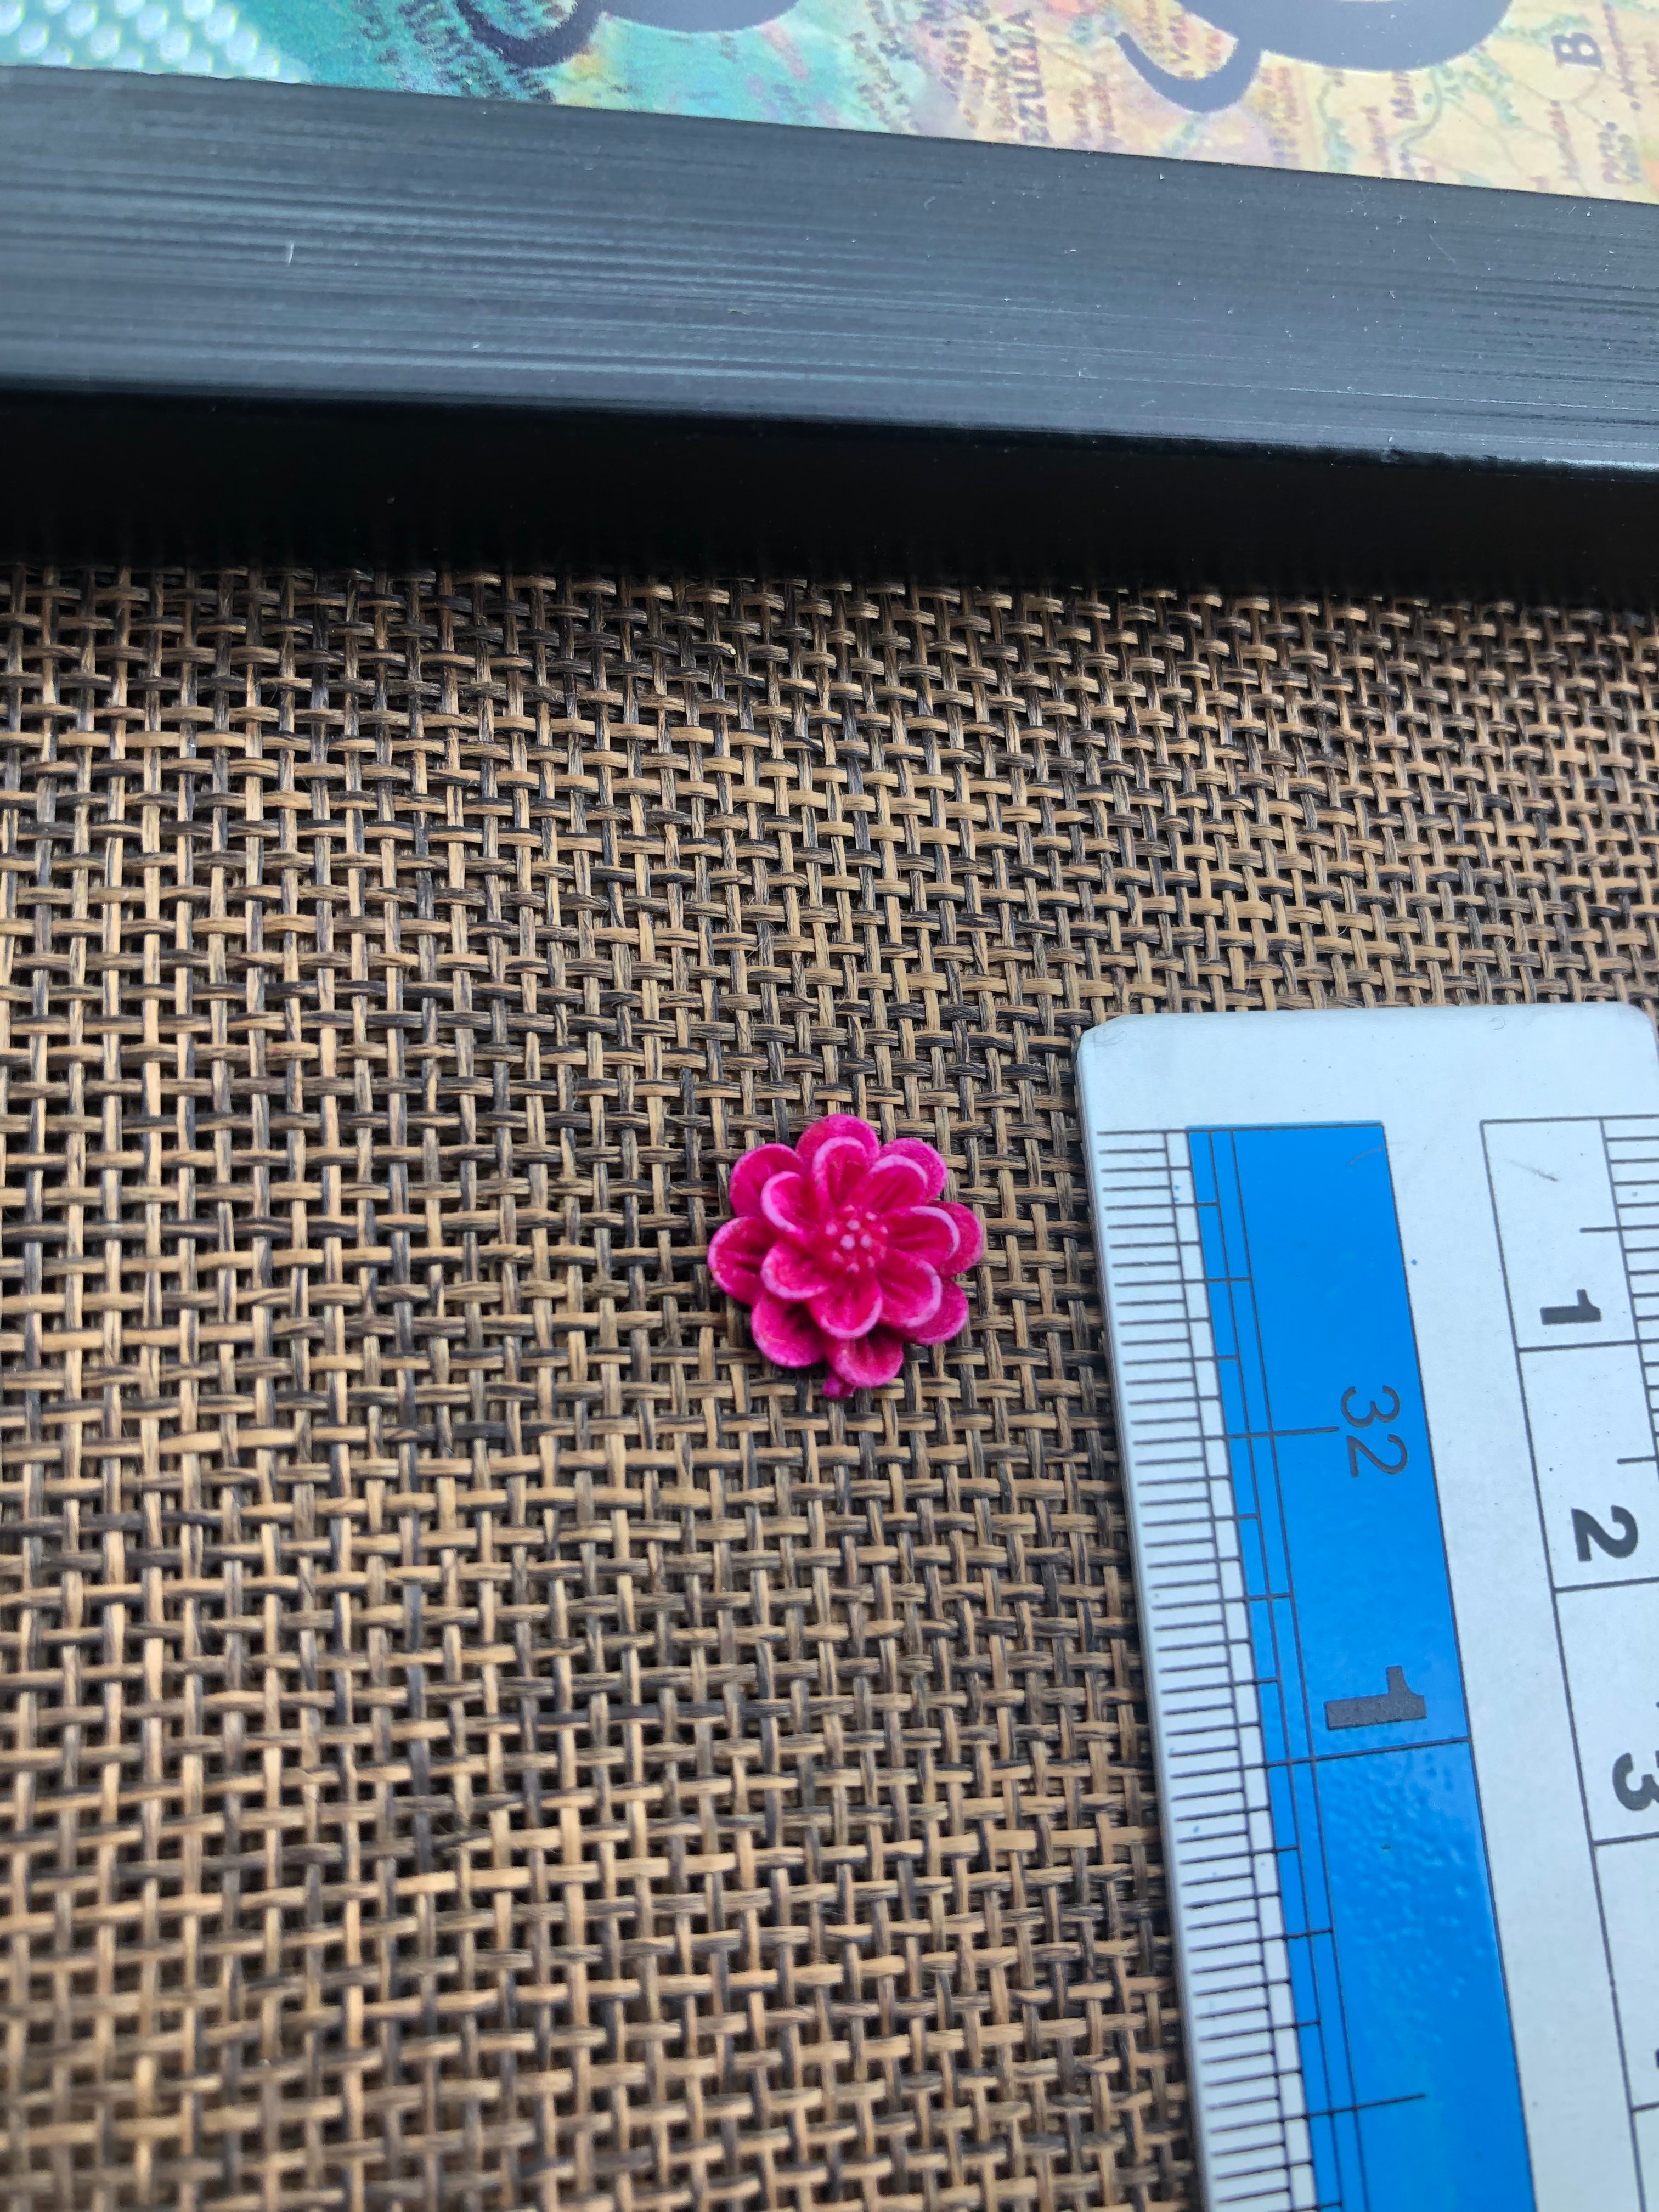 The size of the Beautifully designed 'Flower Design Plastic Button PB068' is measured by using a ruler